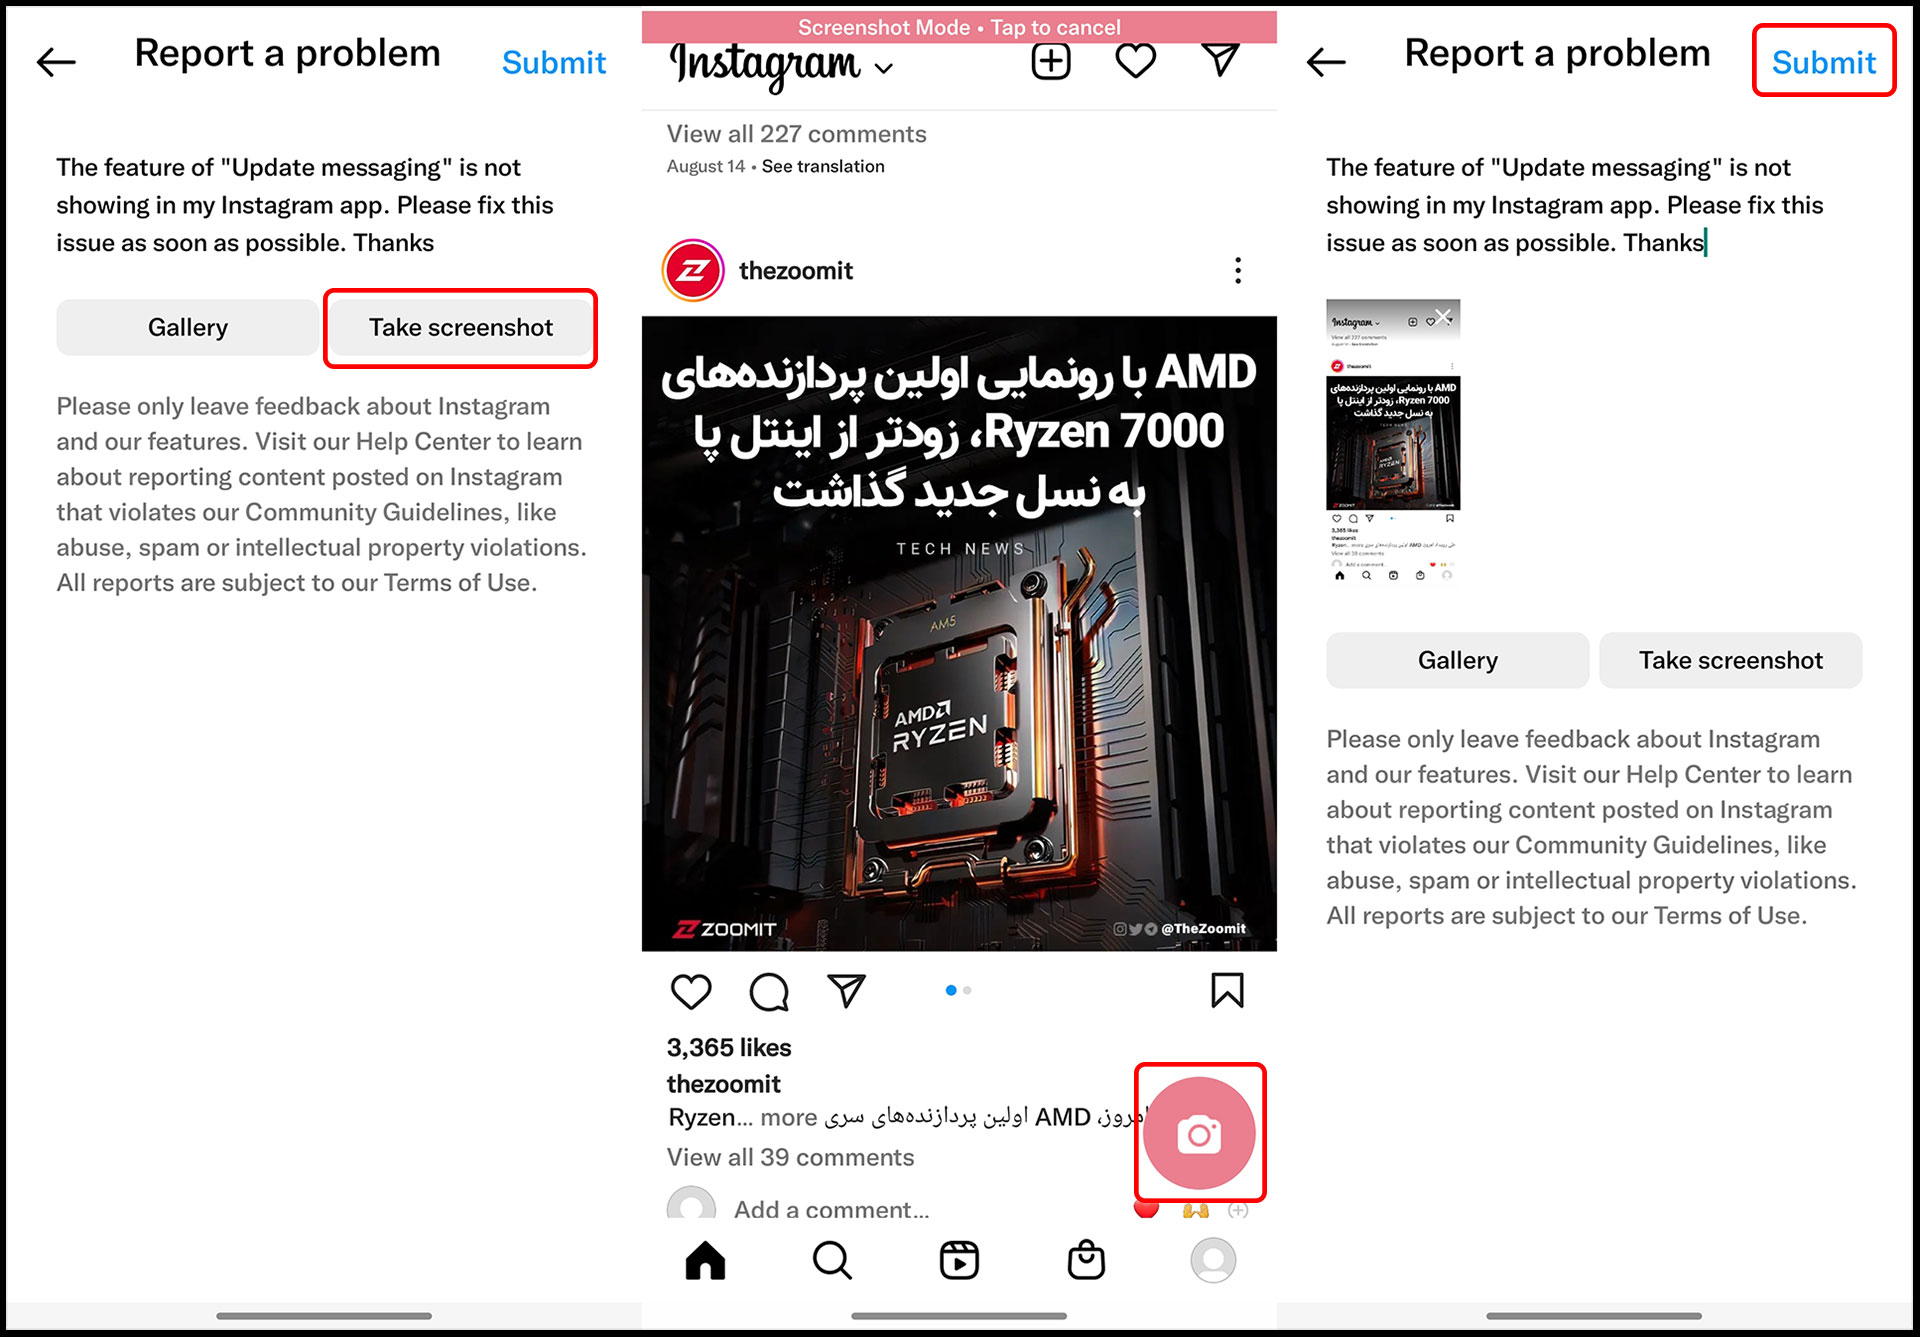 Report the problem of Instagram reply not being activated